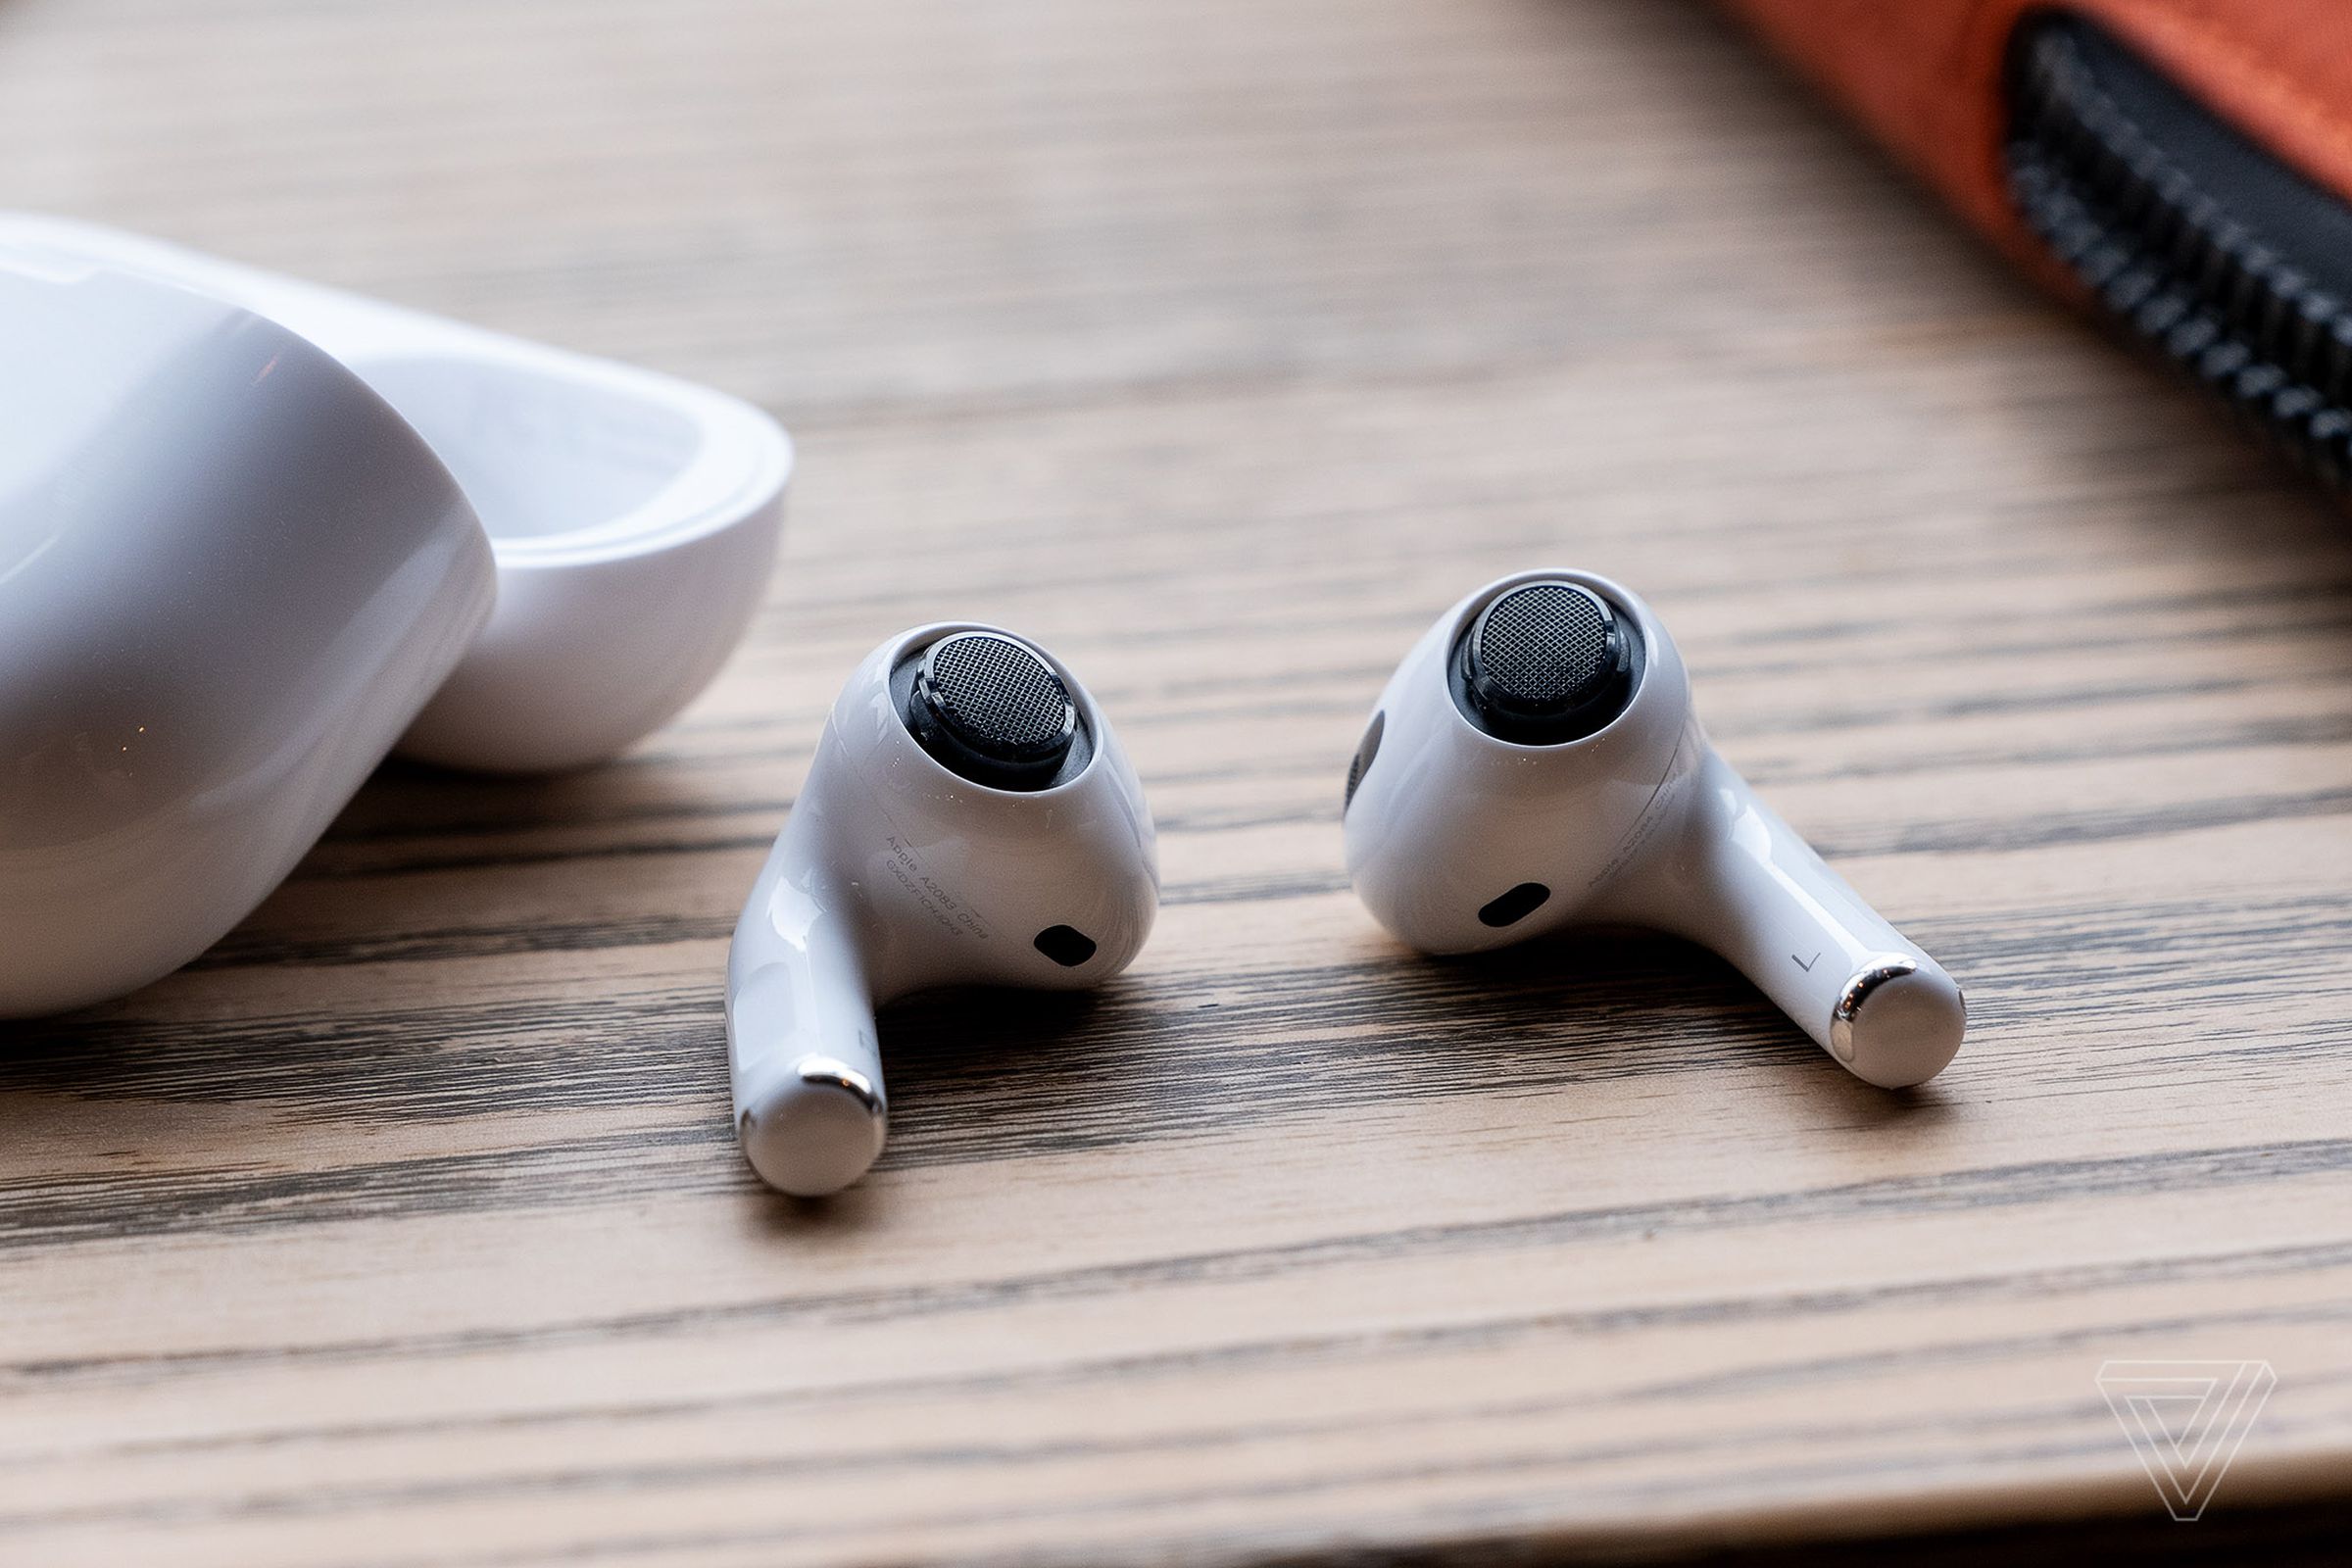 The AirPods Pro still sells for $249.